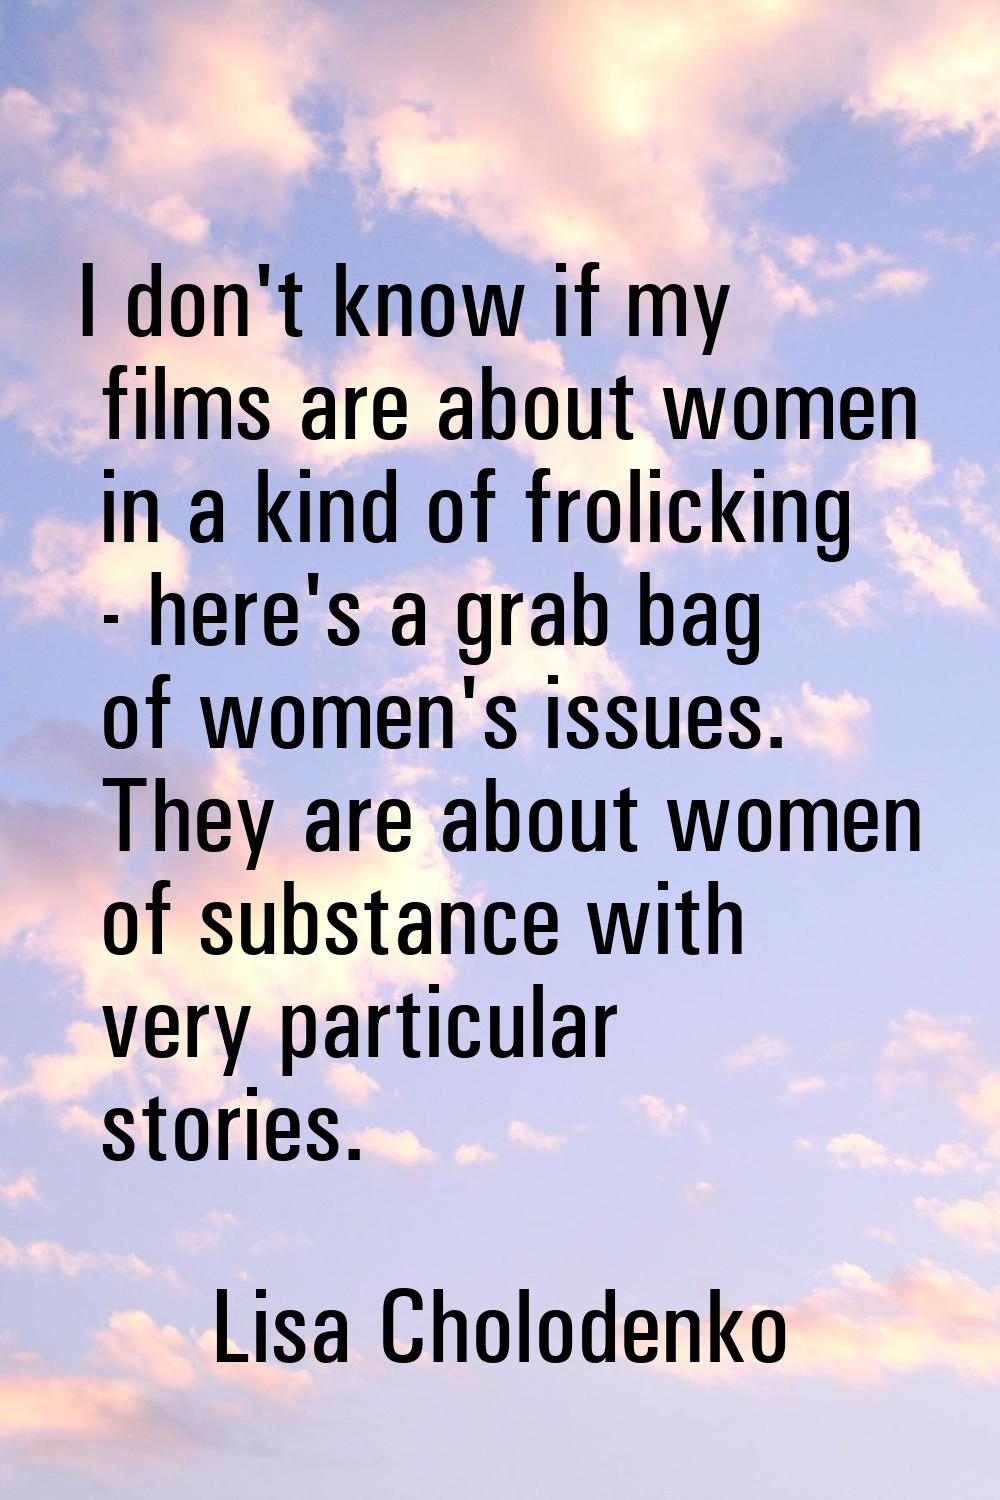 I don't know if my films are about women in a kind of frolicking - here's a grab bag of women's iss